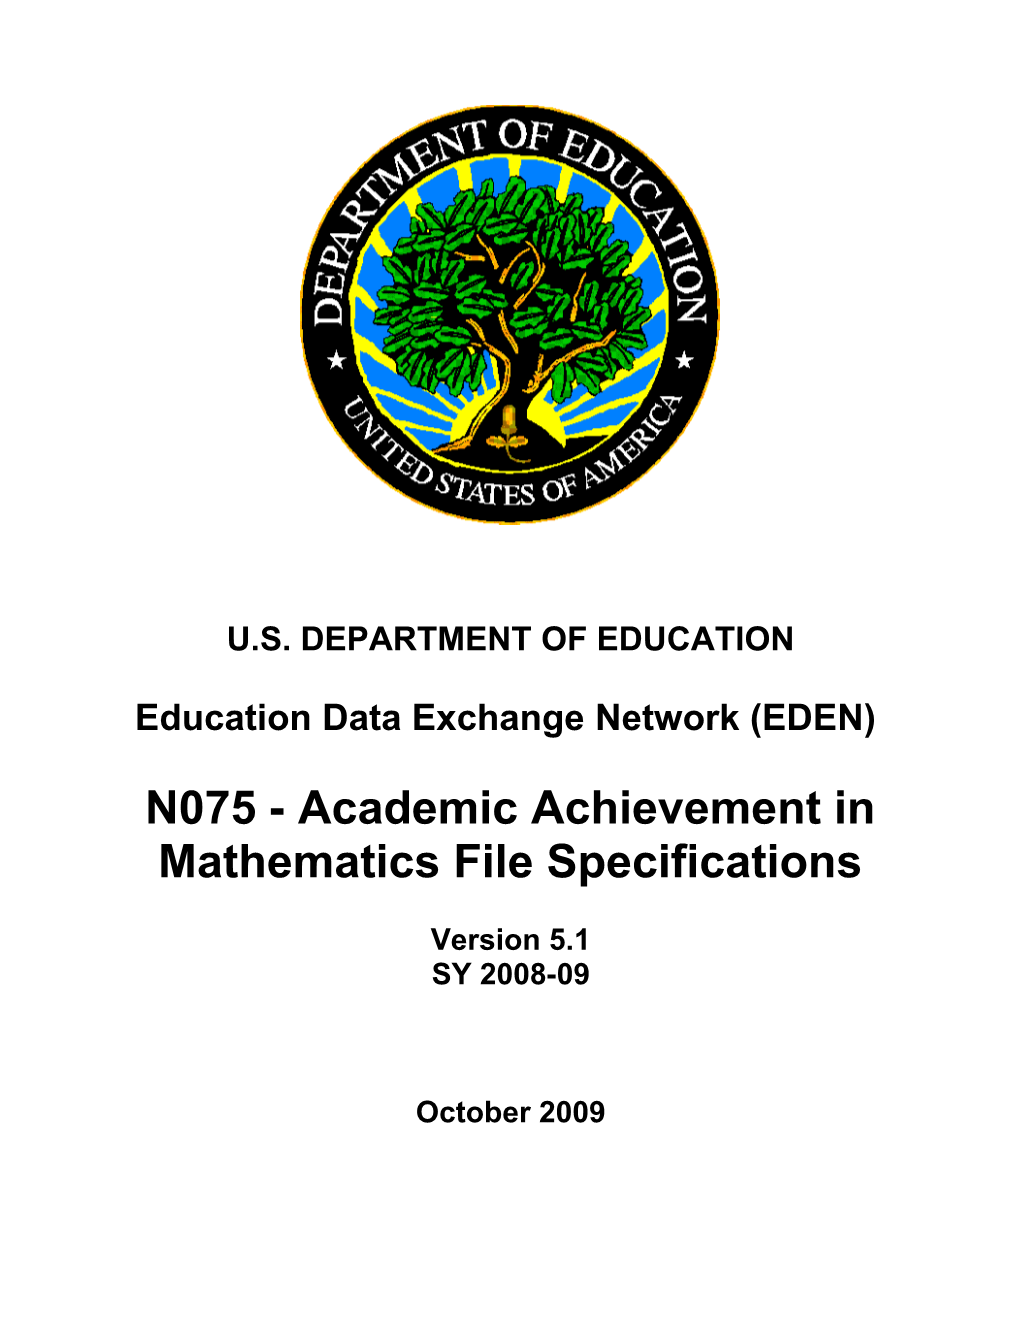 N075 - Academic Achievement in Mathematics File Specifications (MS Word)